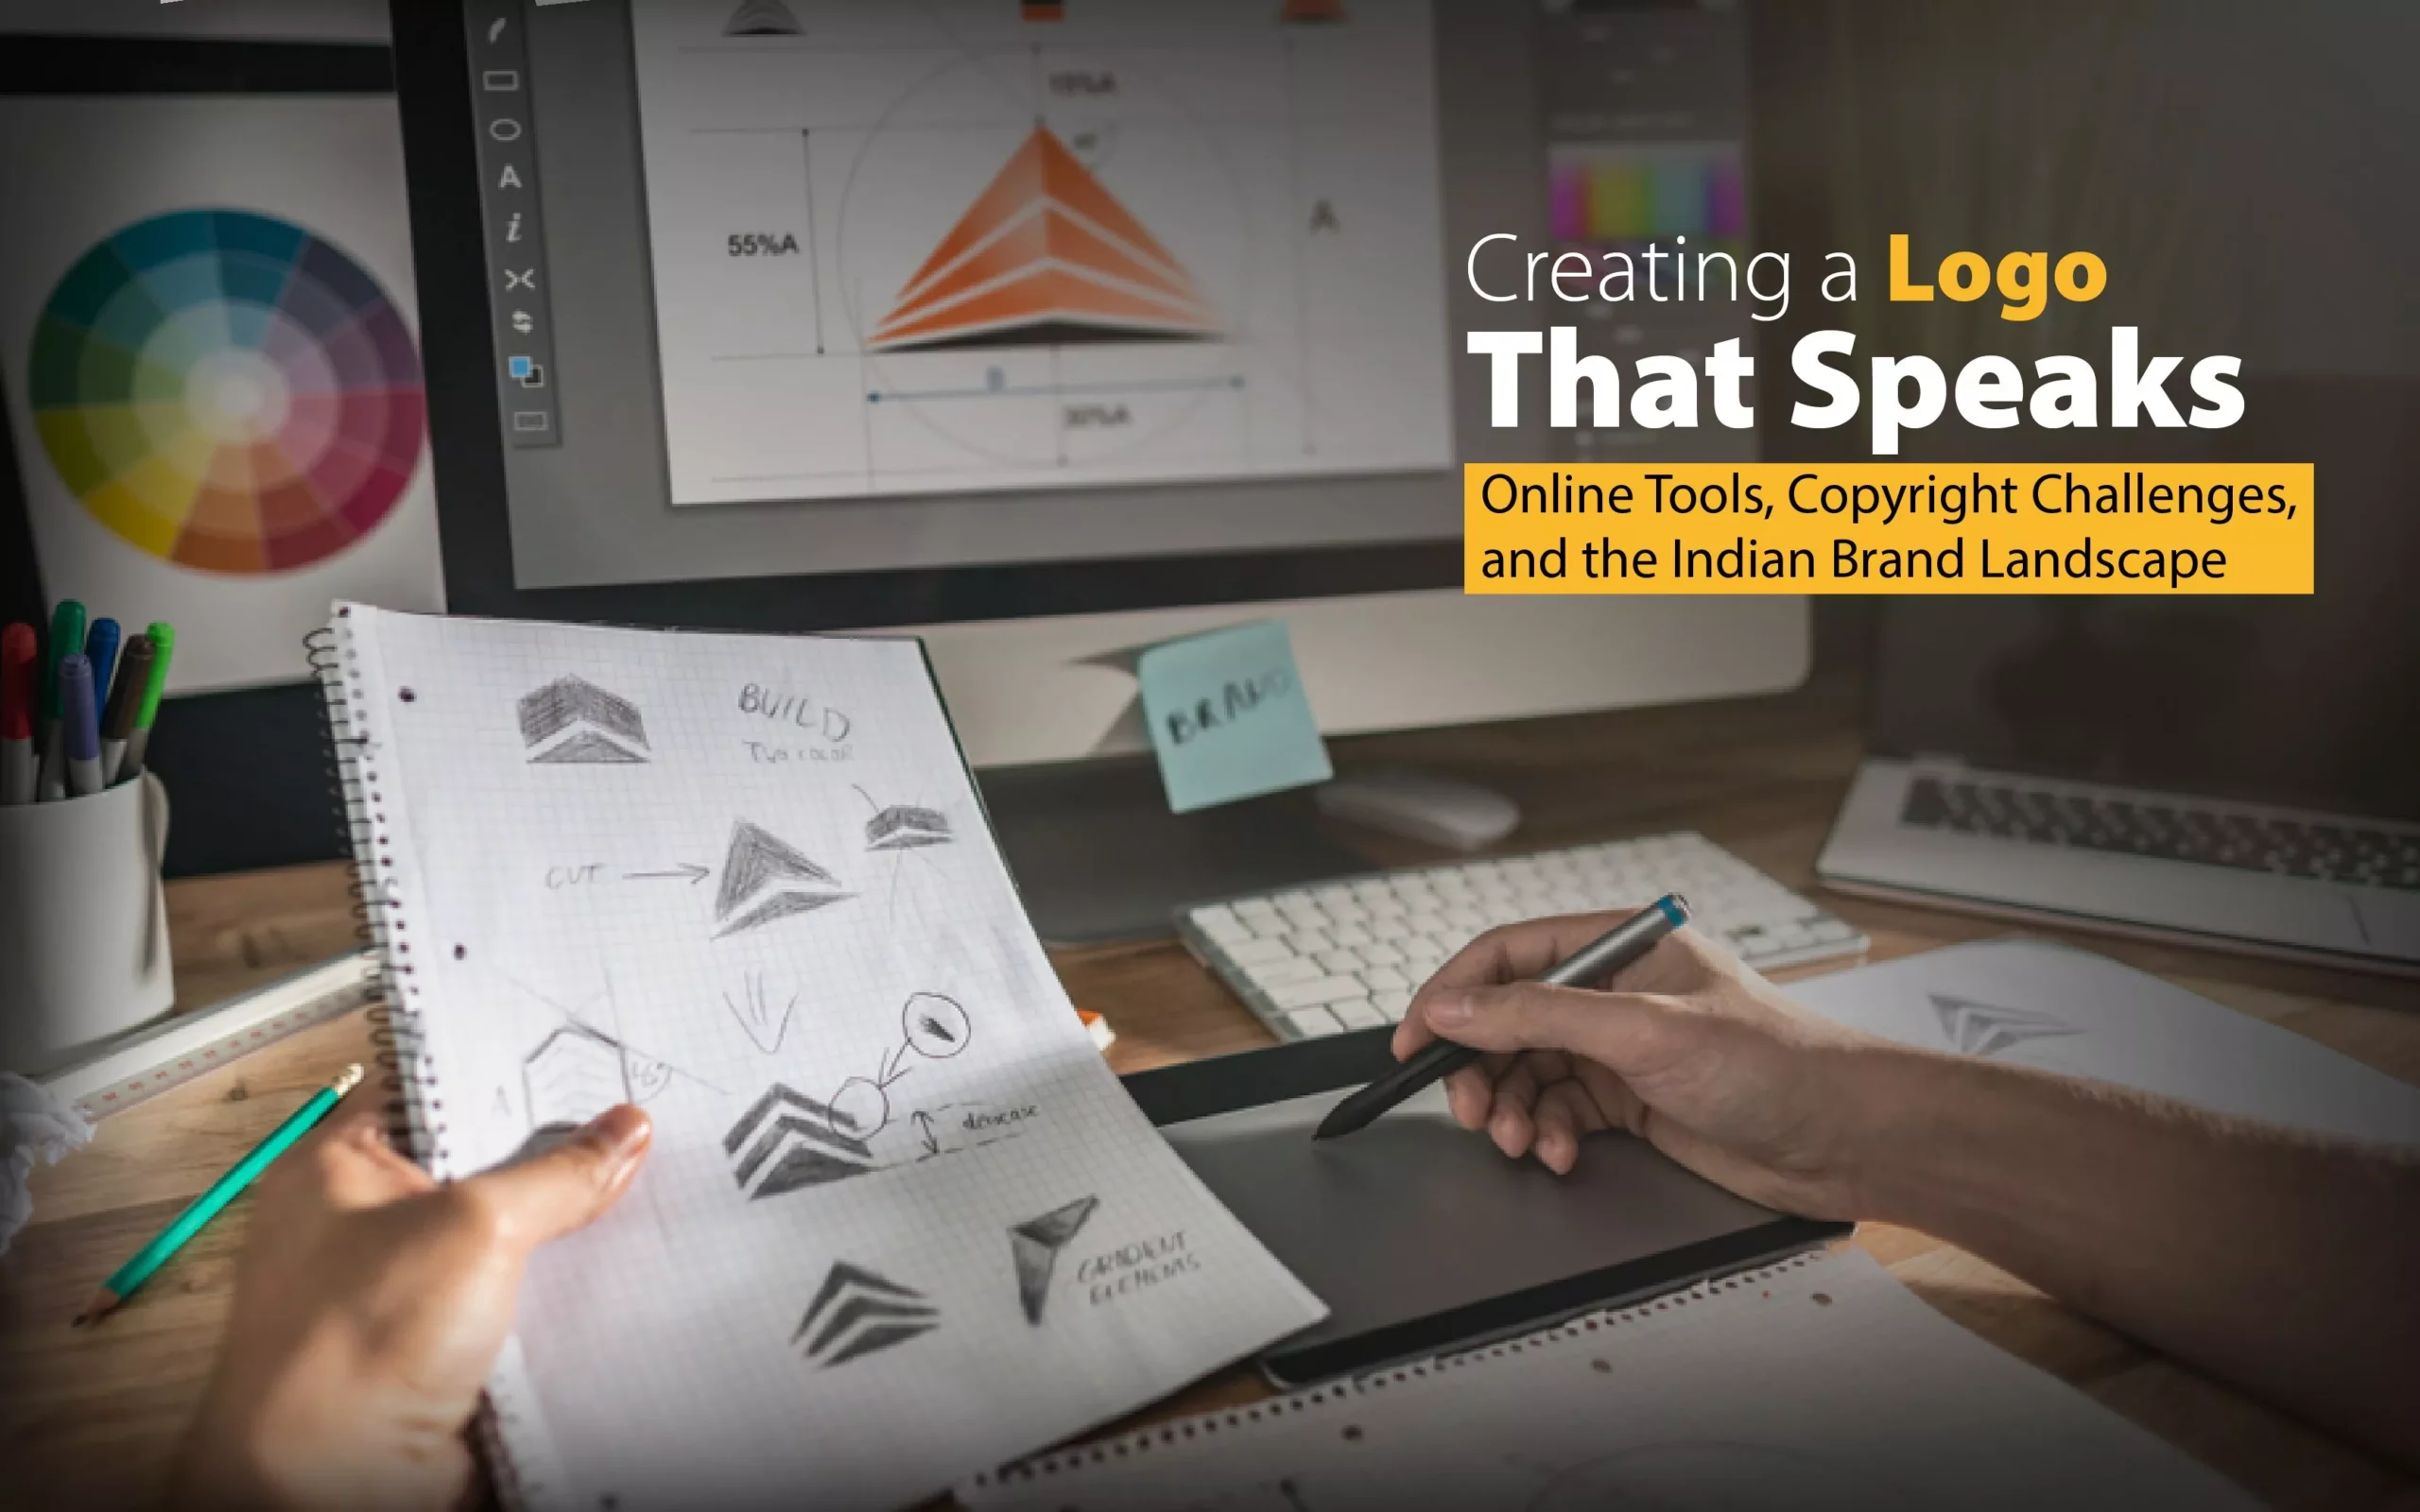 Creating a Logo That Speaks: Online Tools, Copyright Challenges, and the Indian Brand Landscape